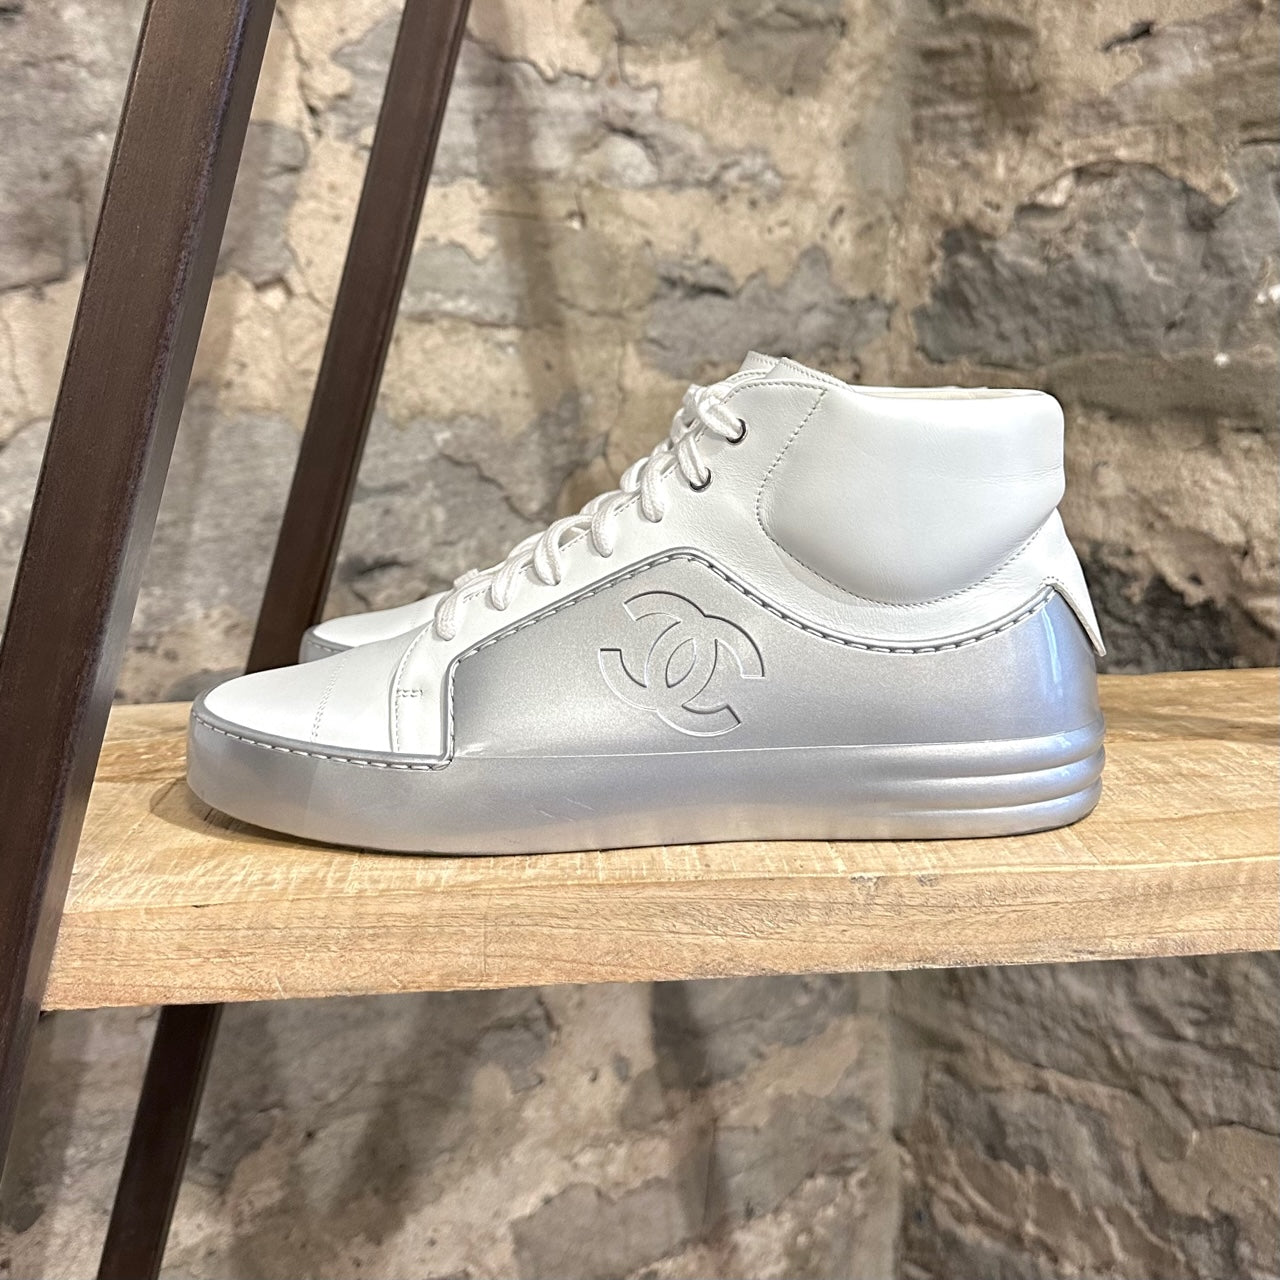 CHANEL, Shoes, Chanel Whitesilver Sneakers